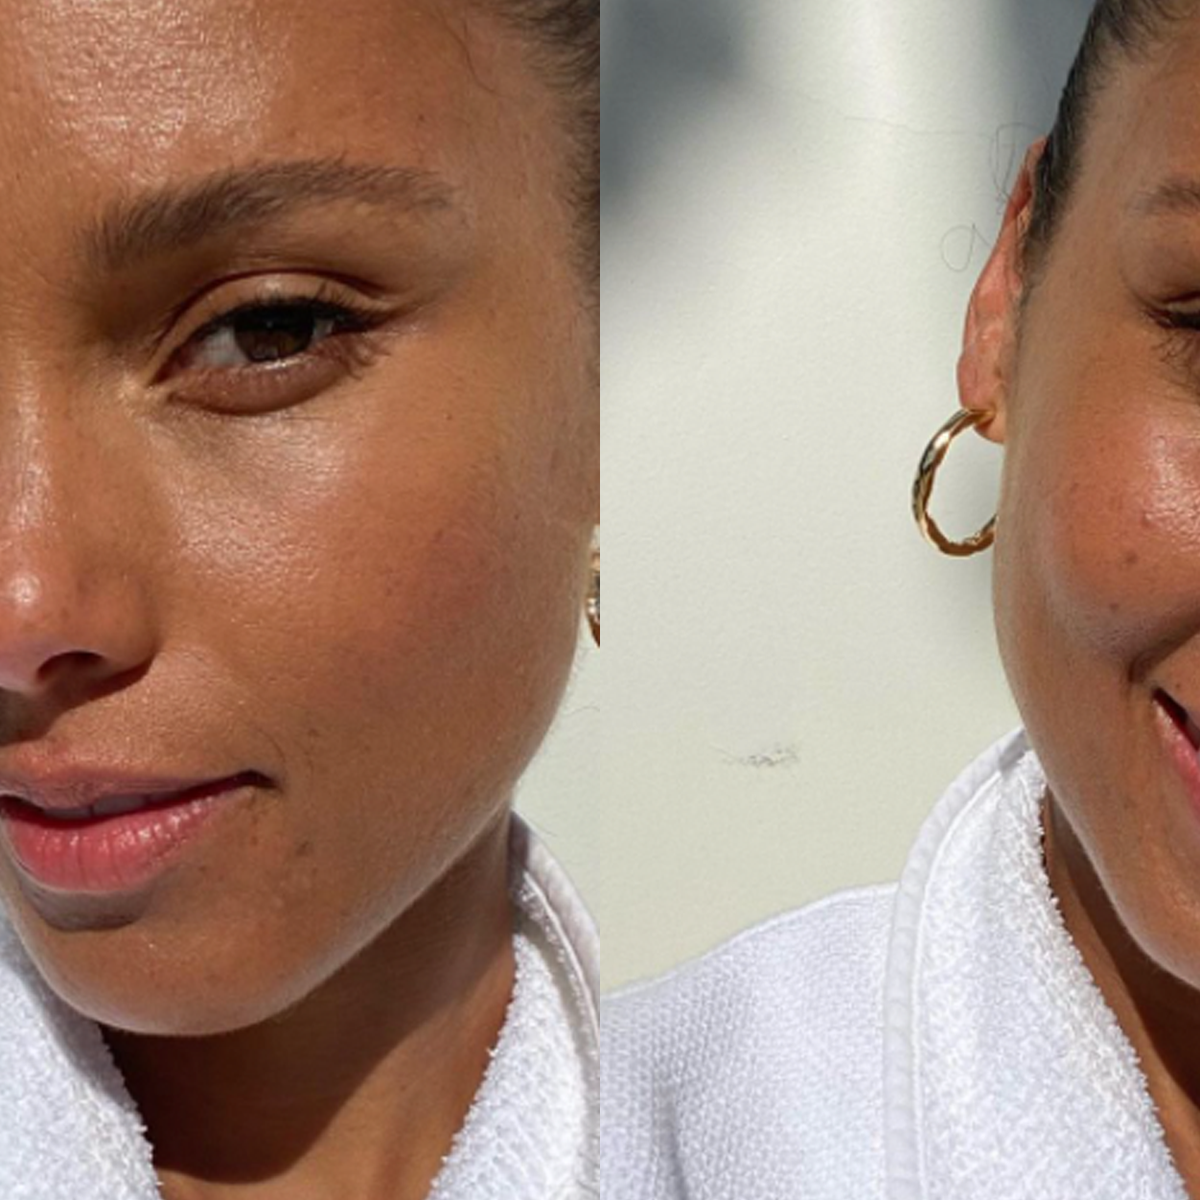 The Truth Behind Alicia Keys' Decision To Stop Wearing Makeup